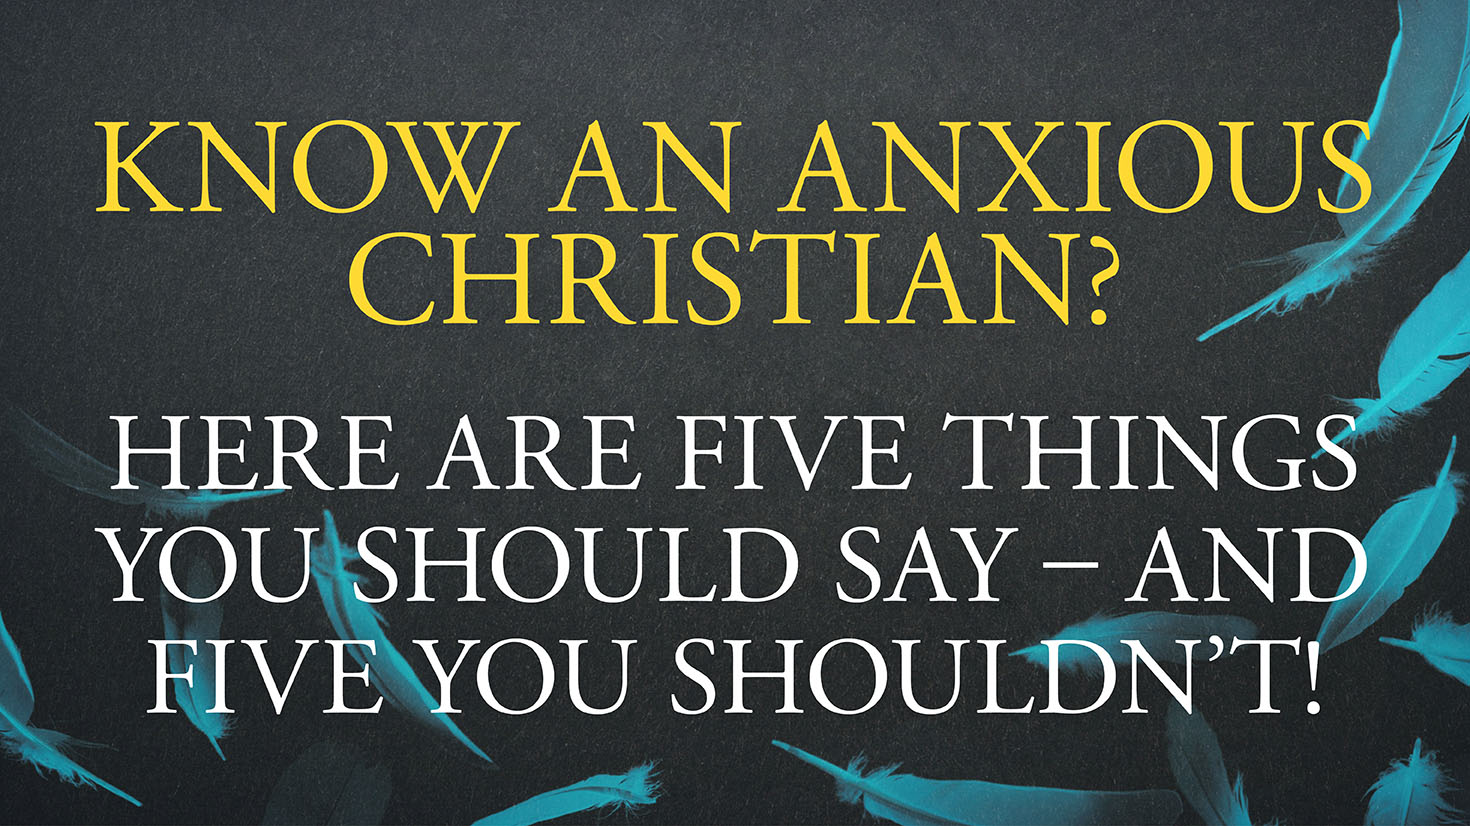 Guest Blog: Know an anxious Christian? Five things you should say - and five you shouldn't!